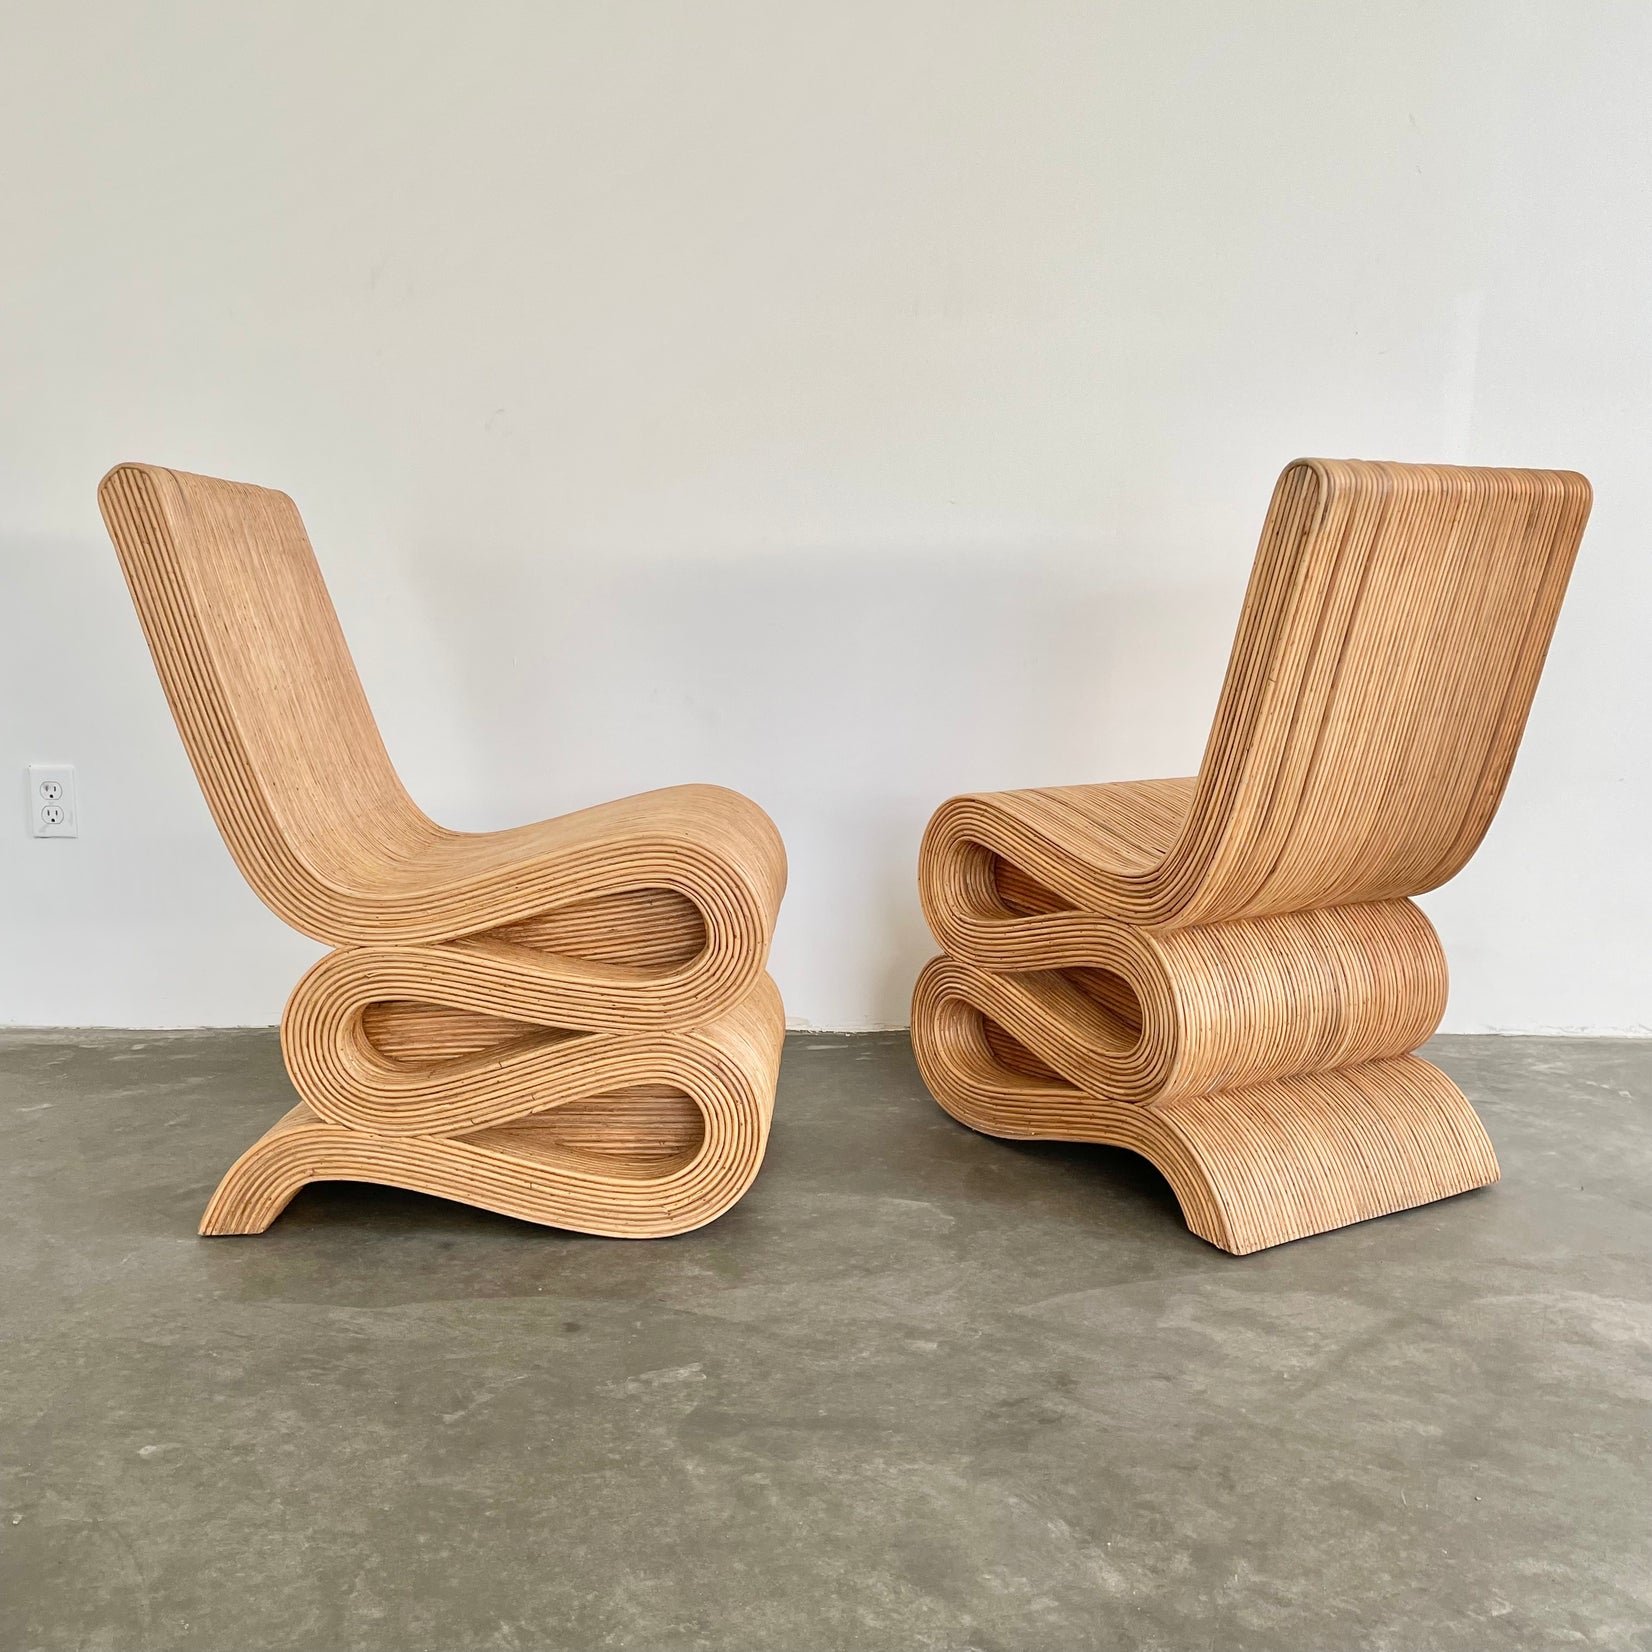 Pair of Pencil Rattan Chairs in the Style of Frank Gehry, 1970s USA